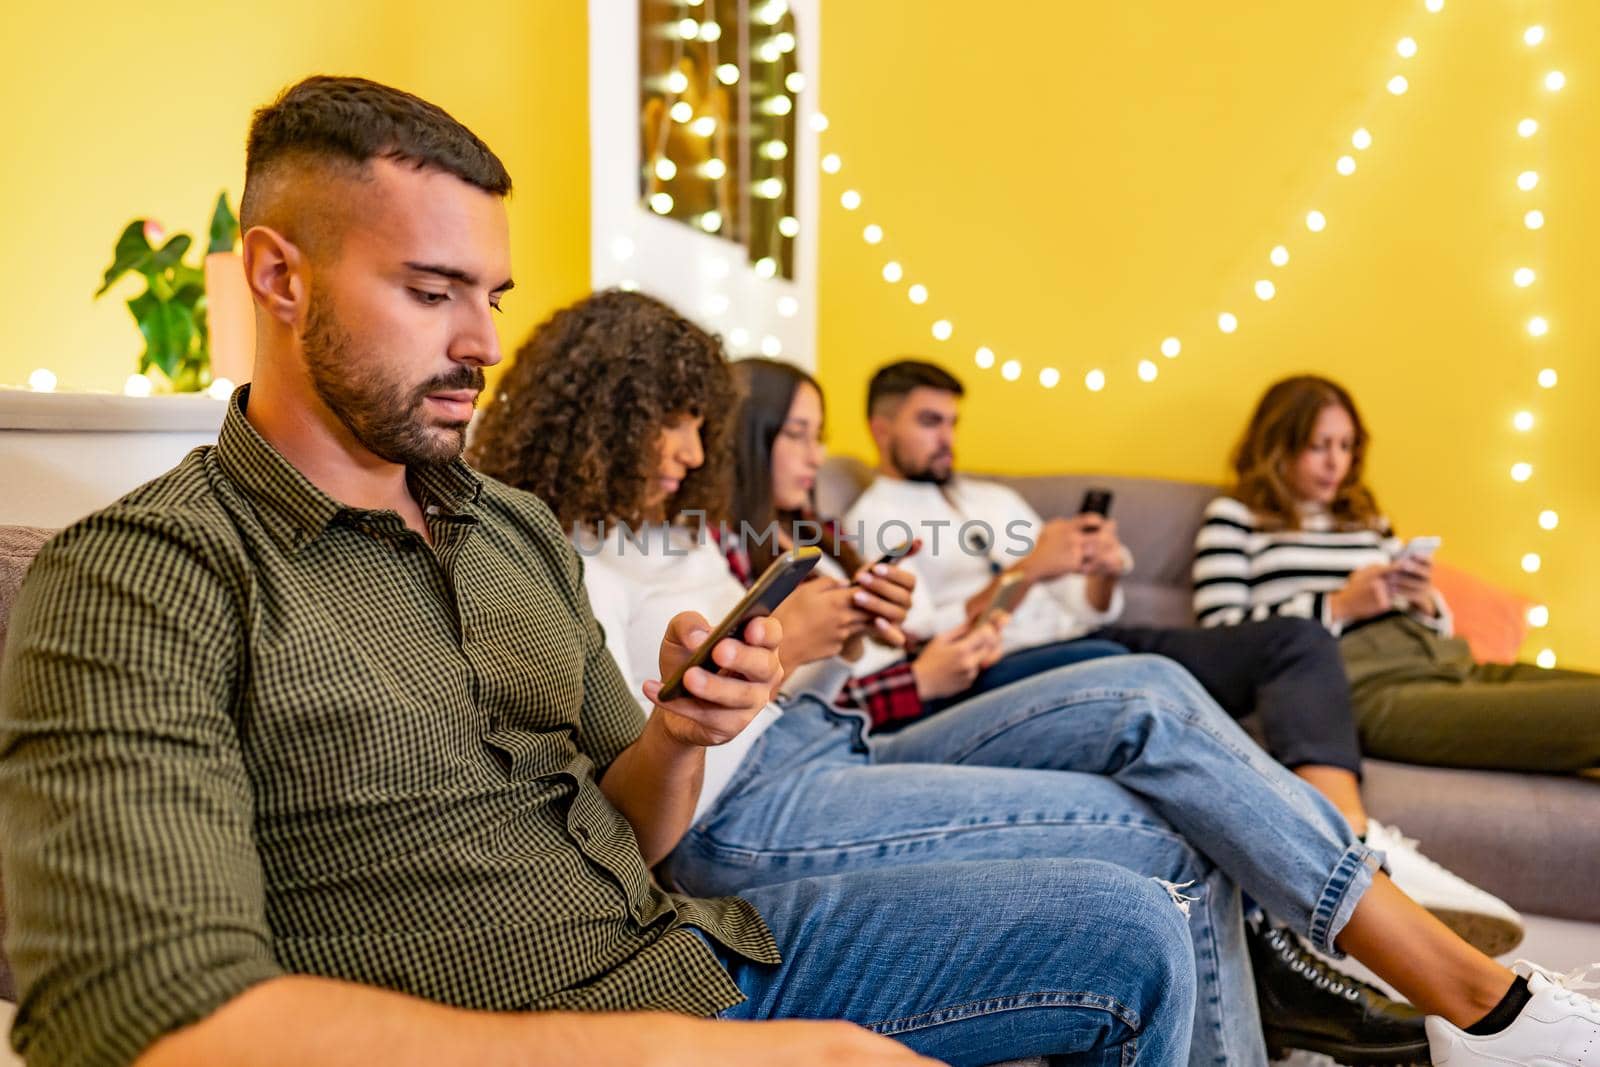 Group of serious young student friends at home sitting on the couch spend time using smartphones without real interaction between them. New social and human habits due to internet mobile technology